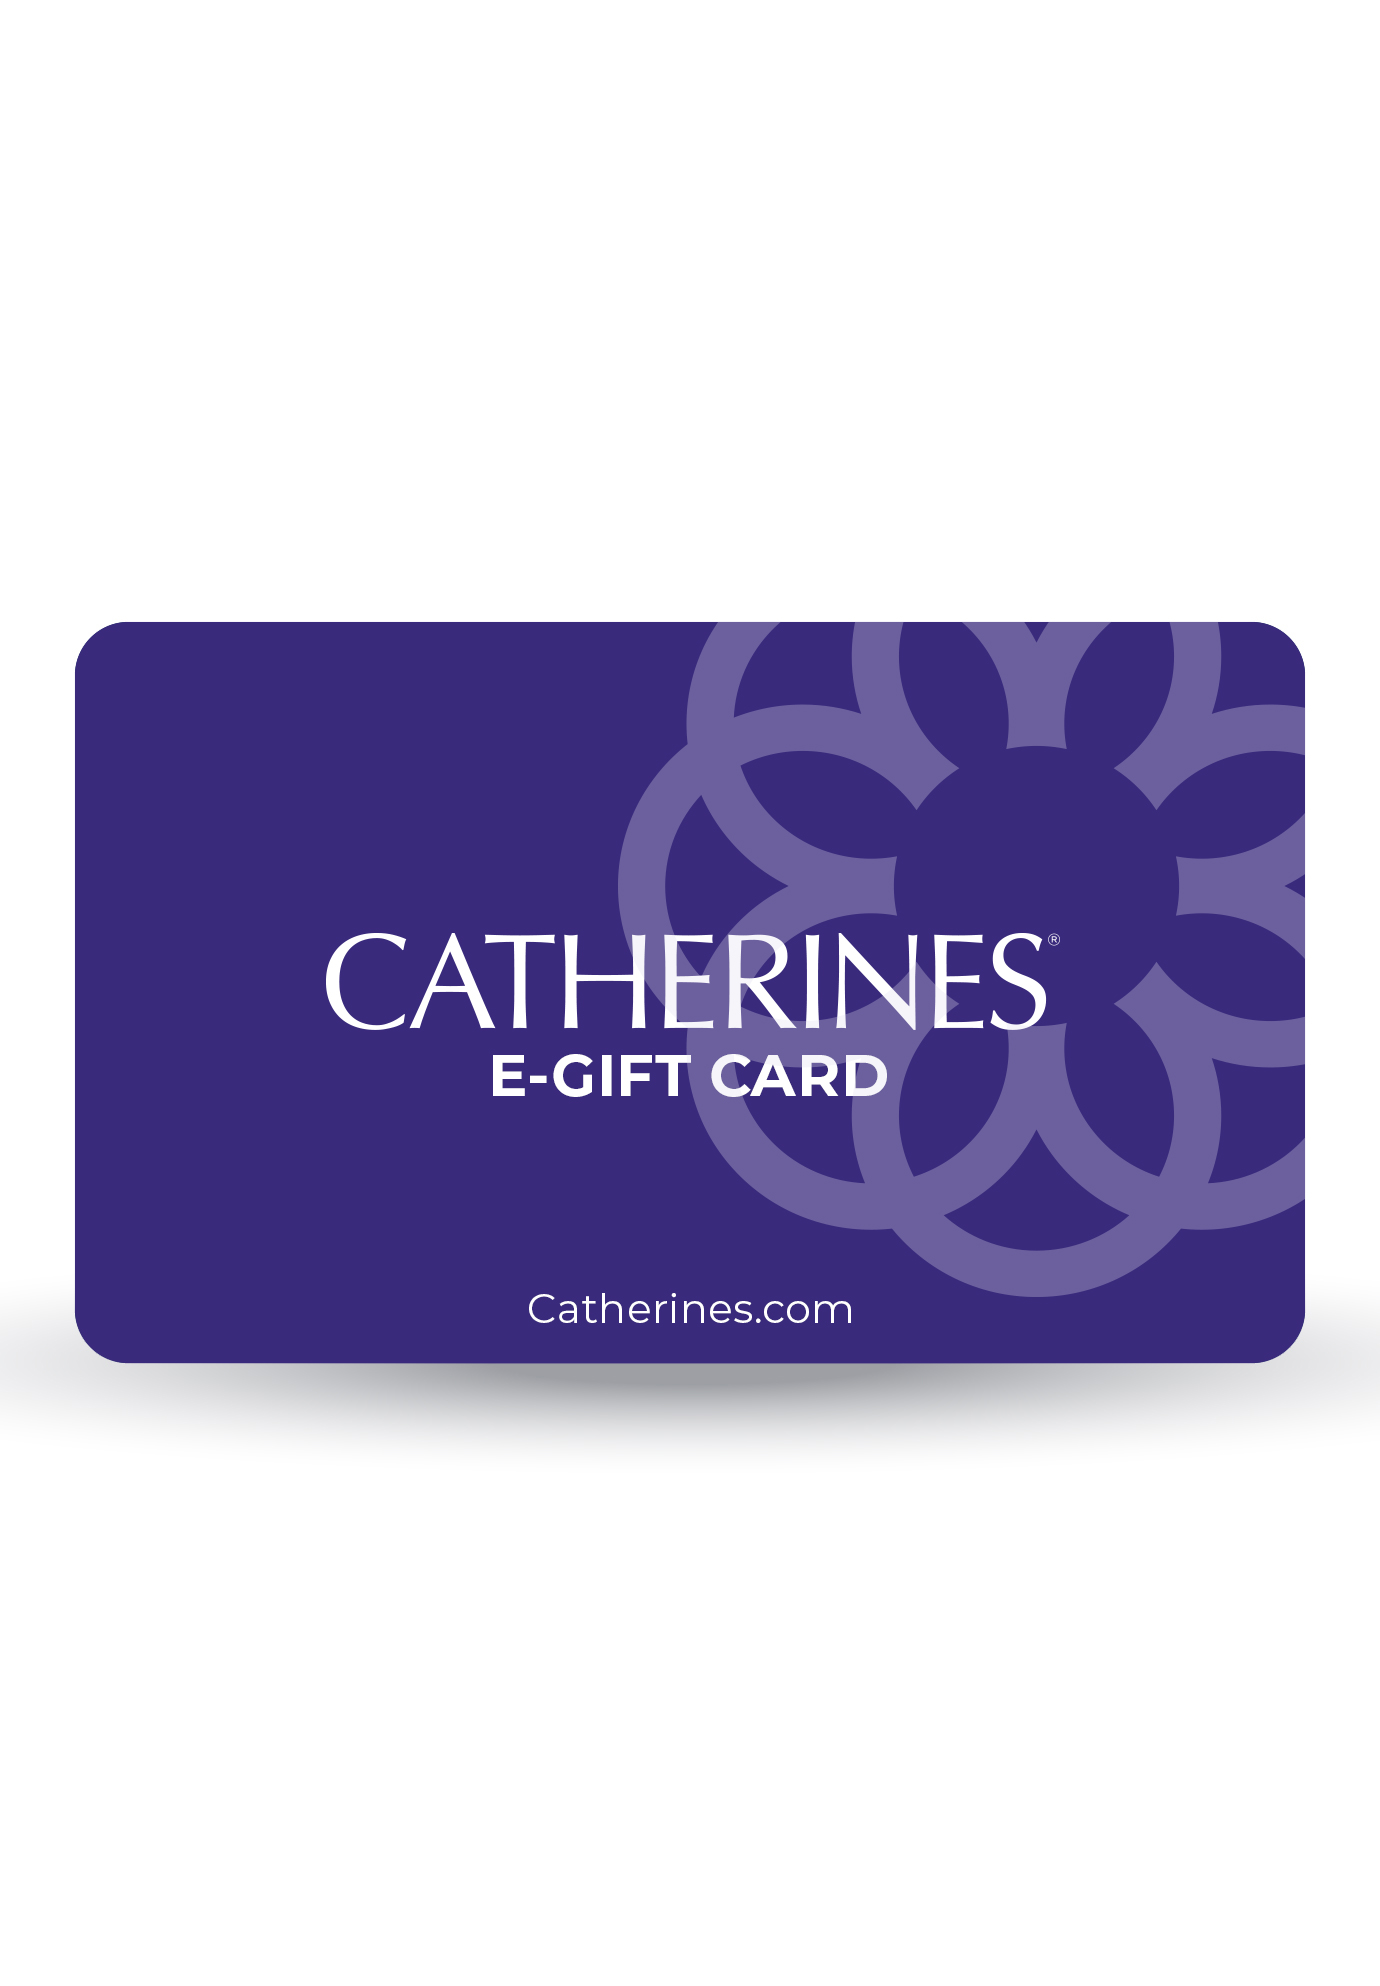 CATHERINES E-GIFT CARD, 